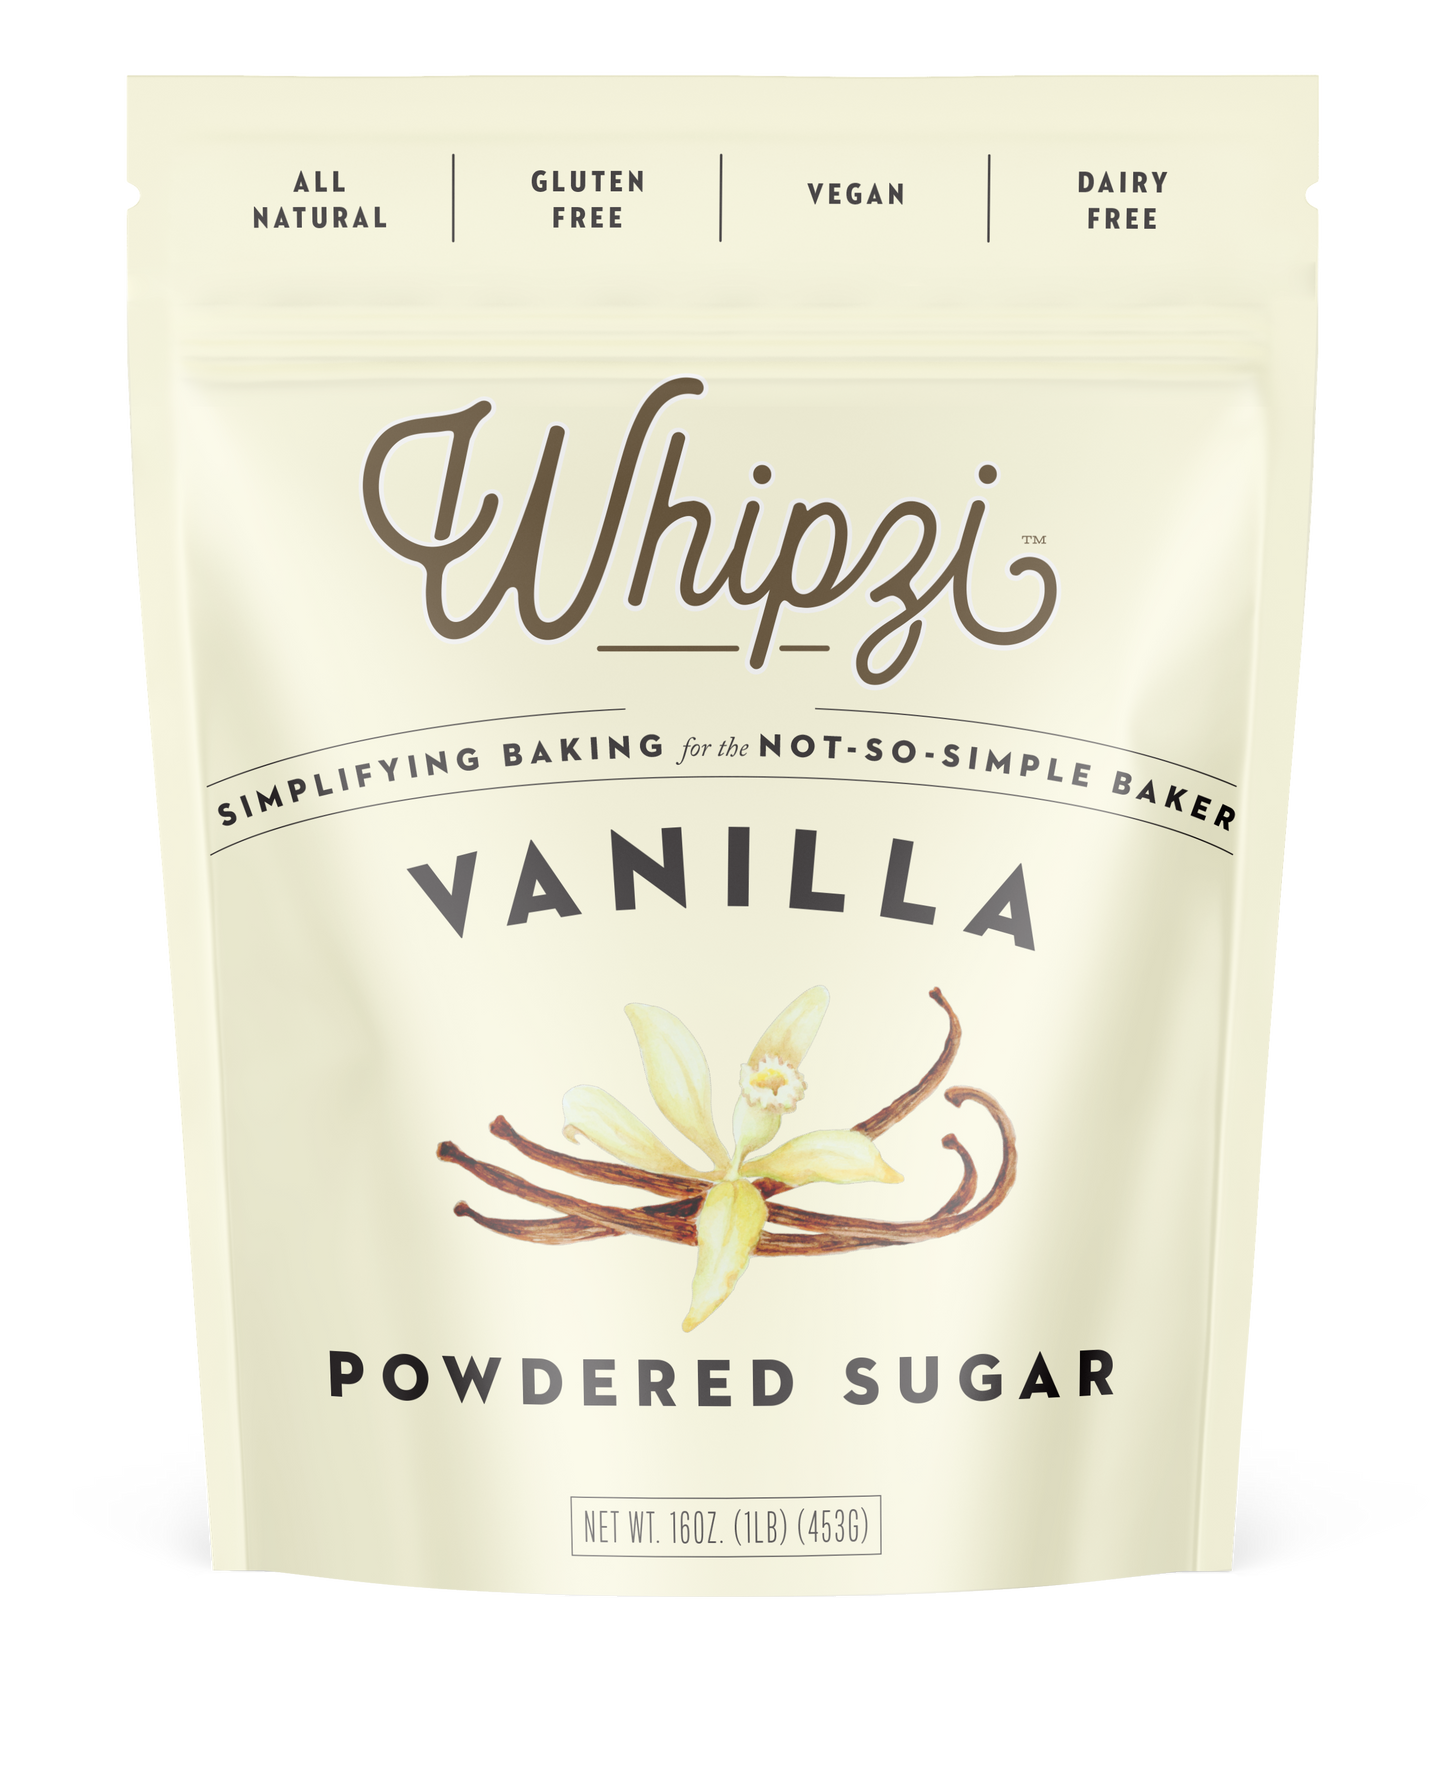 Whipzi™ vanilla flavored powdered sugar. Perfect for frosting, royal icing, fudge, milkshakes, fondant, macarons and much more! Use in place of regular powdered sugar. 